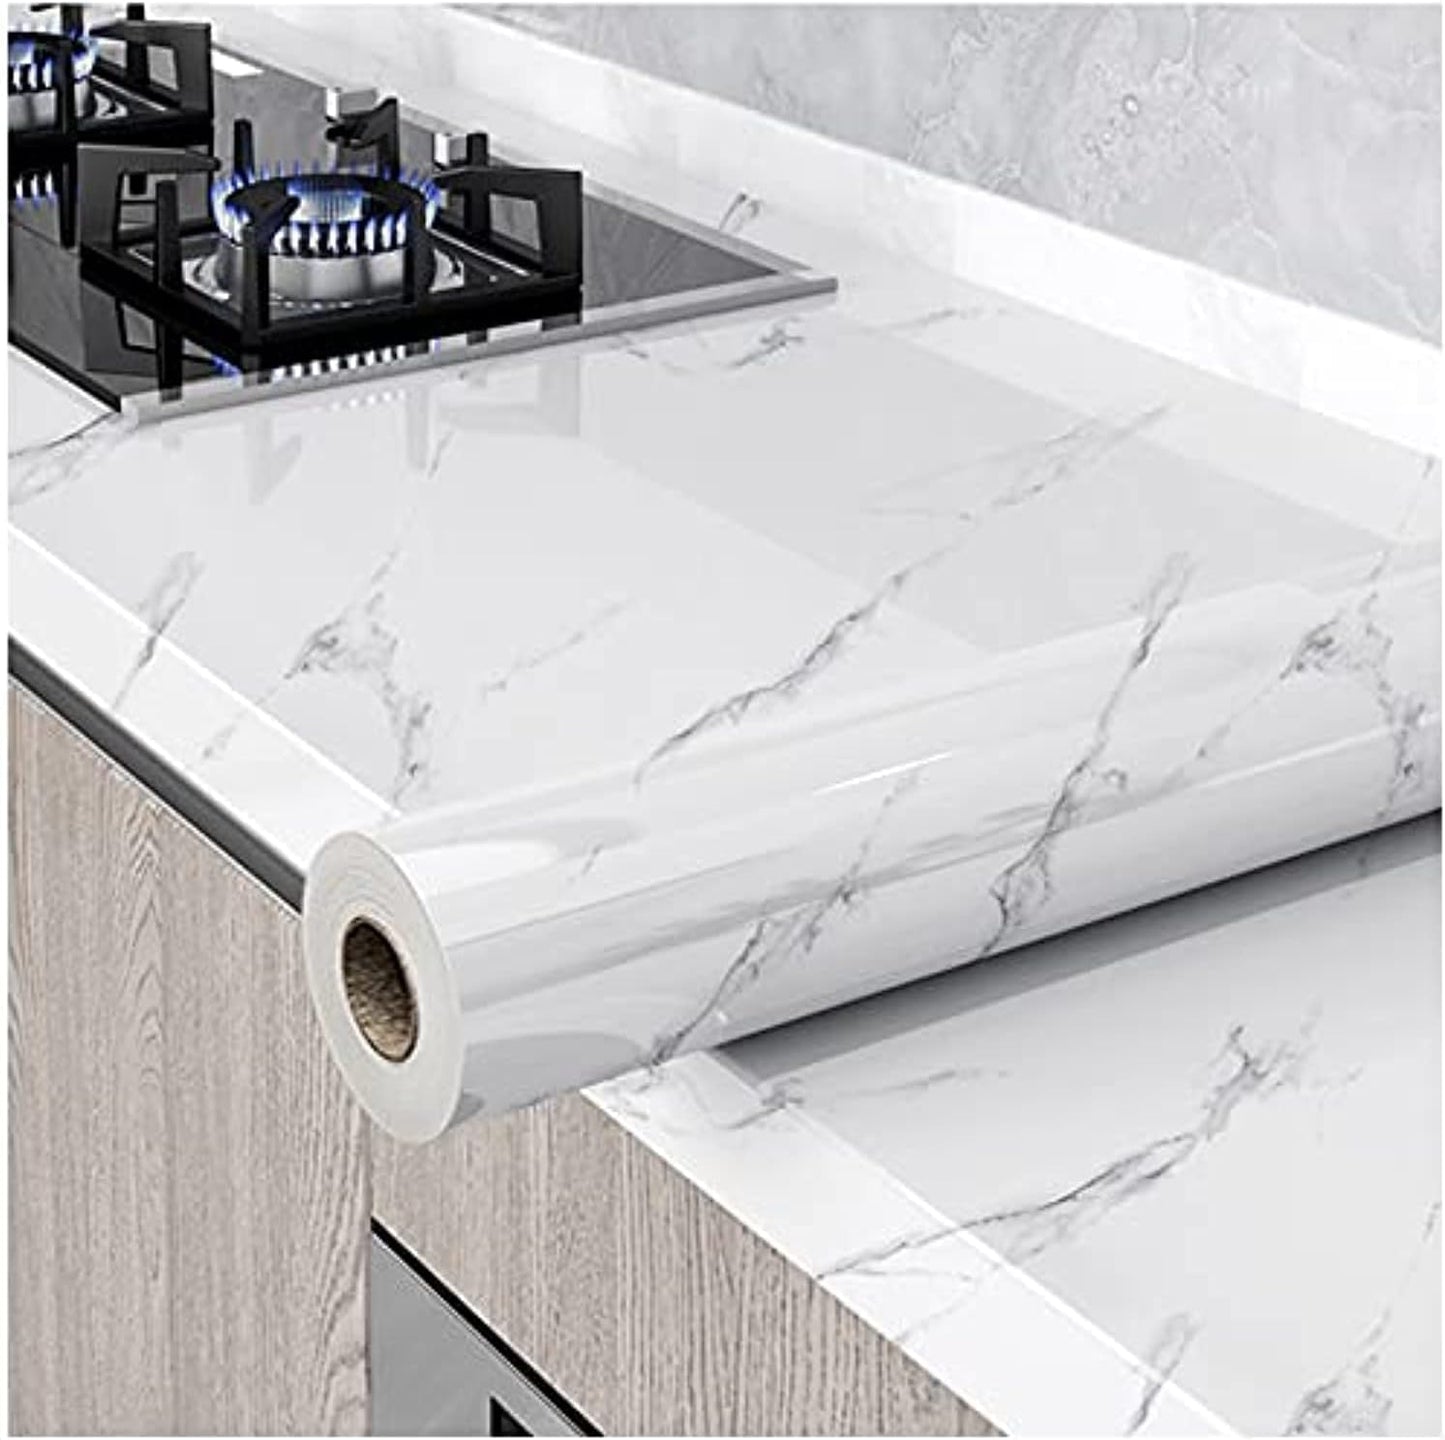 Glossy Marble Wallpaper Granite Gray/White Peel and Stick Self Adhesive Removable Waterproof Countertop Paper for Cabinet Furniture Kitchen Viny Film, 15.8″ ×118″